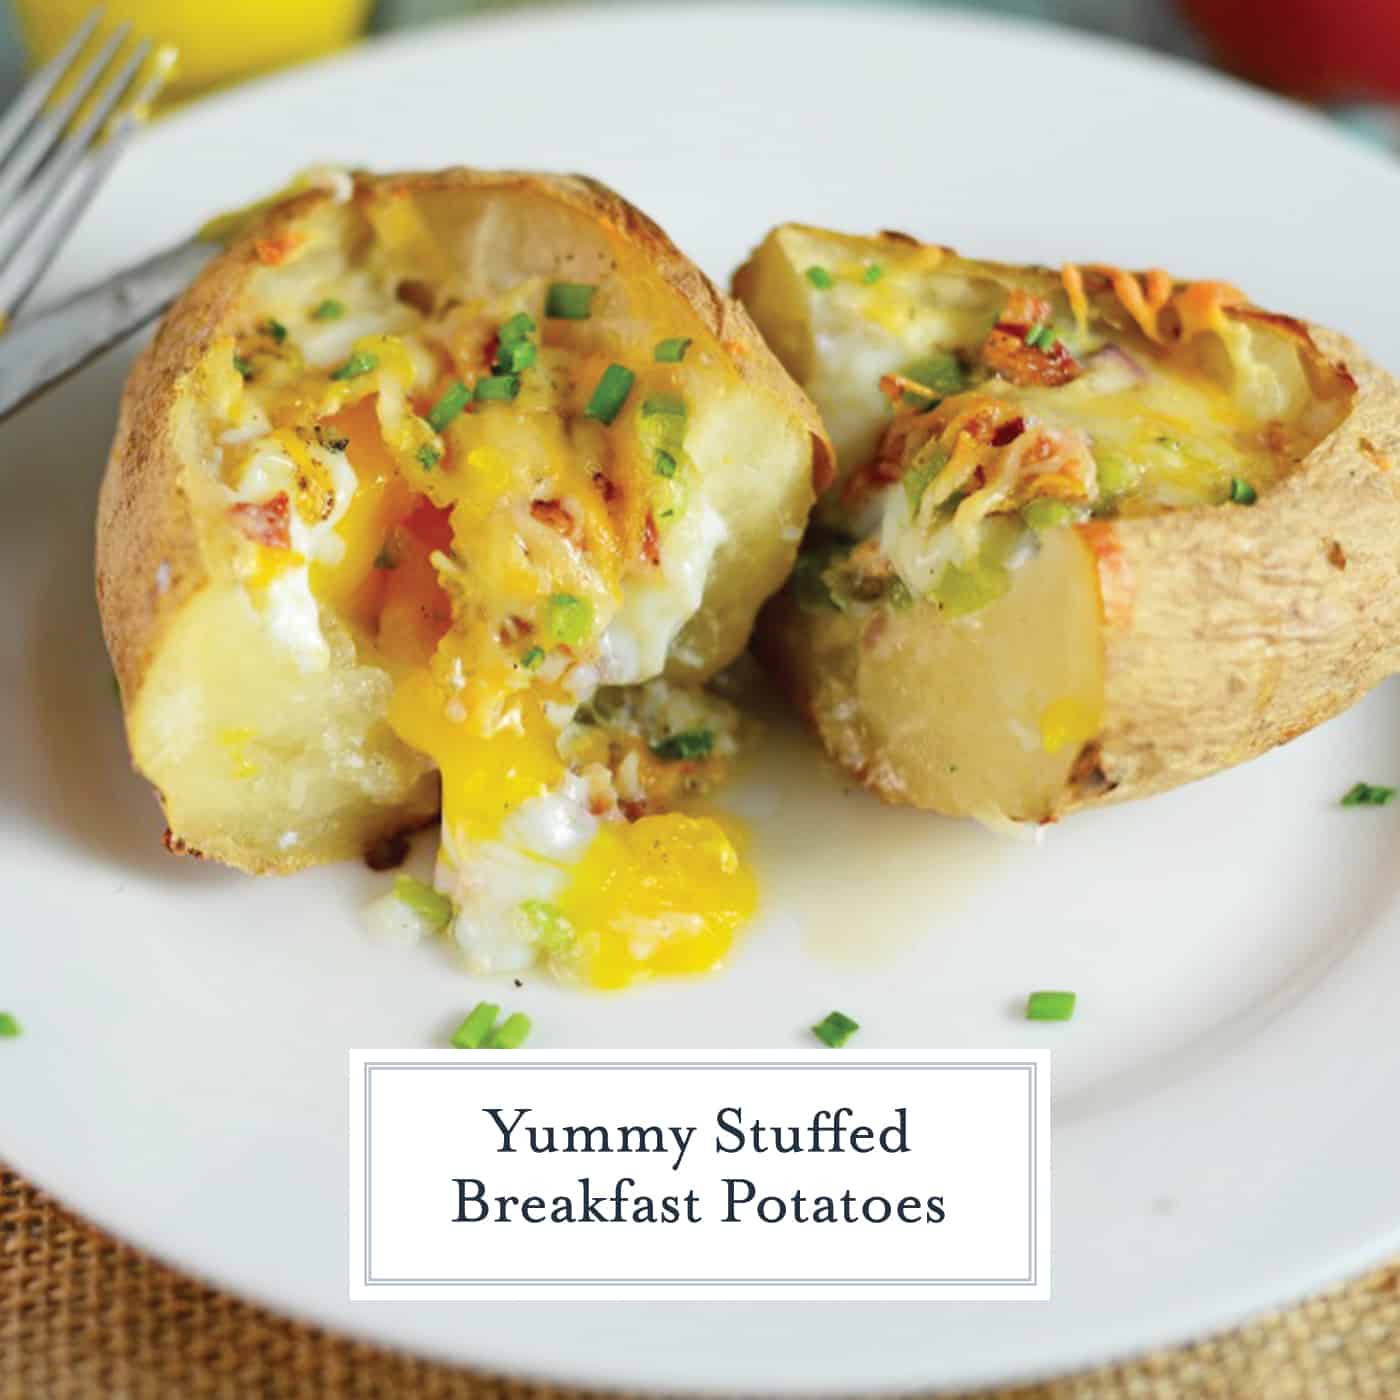 Stuffed Breakfast Potatoes are an easy one-dish breakfast solution perfect for feeding a group! Stuffed with cheese, your choice of veggies, bacon and an egg! #breakfastpotatoes #stuffedbakedpotatoes www.savoryexperiments.com